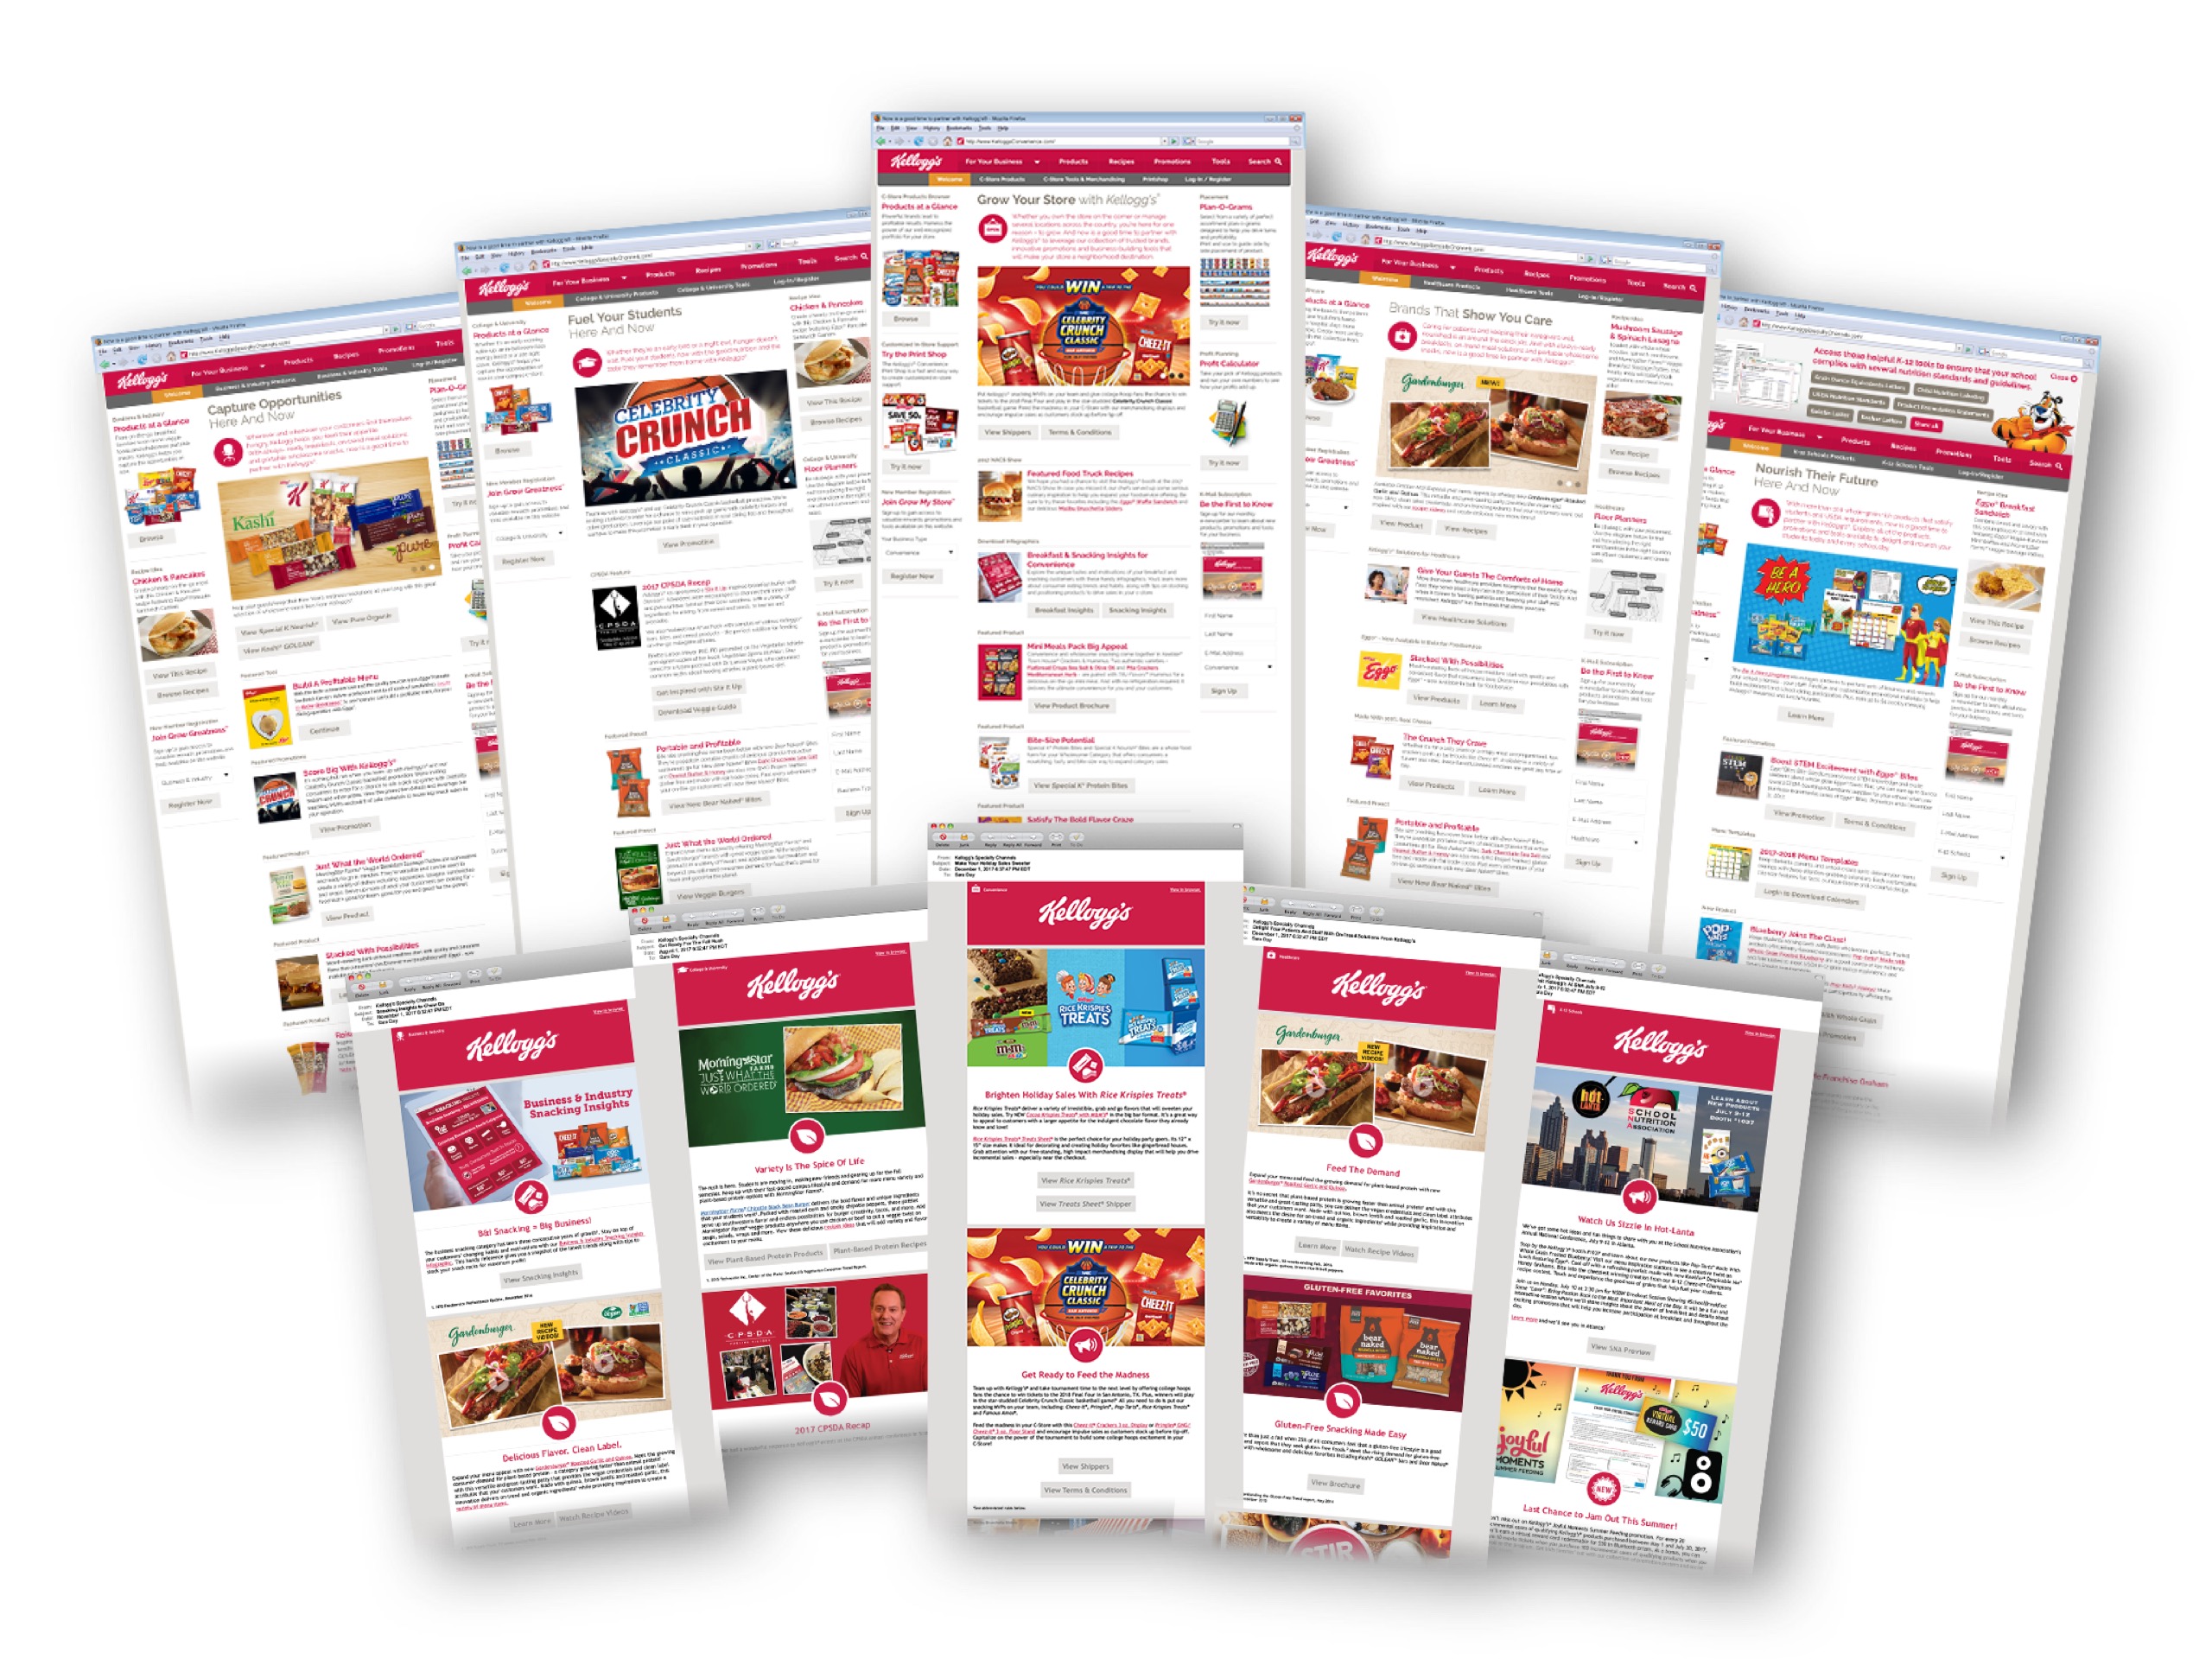 Kellogg's Specialty Channels K-Mail image